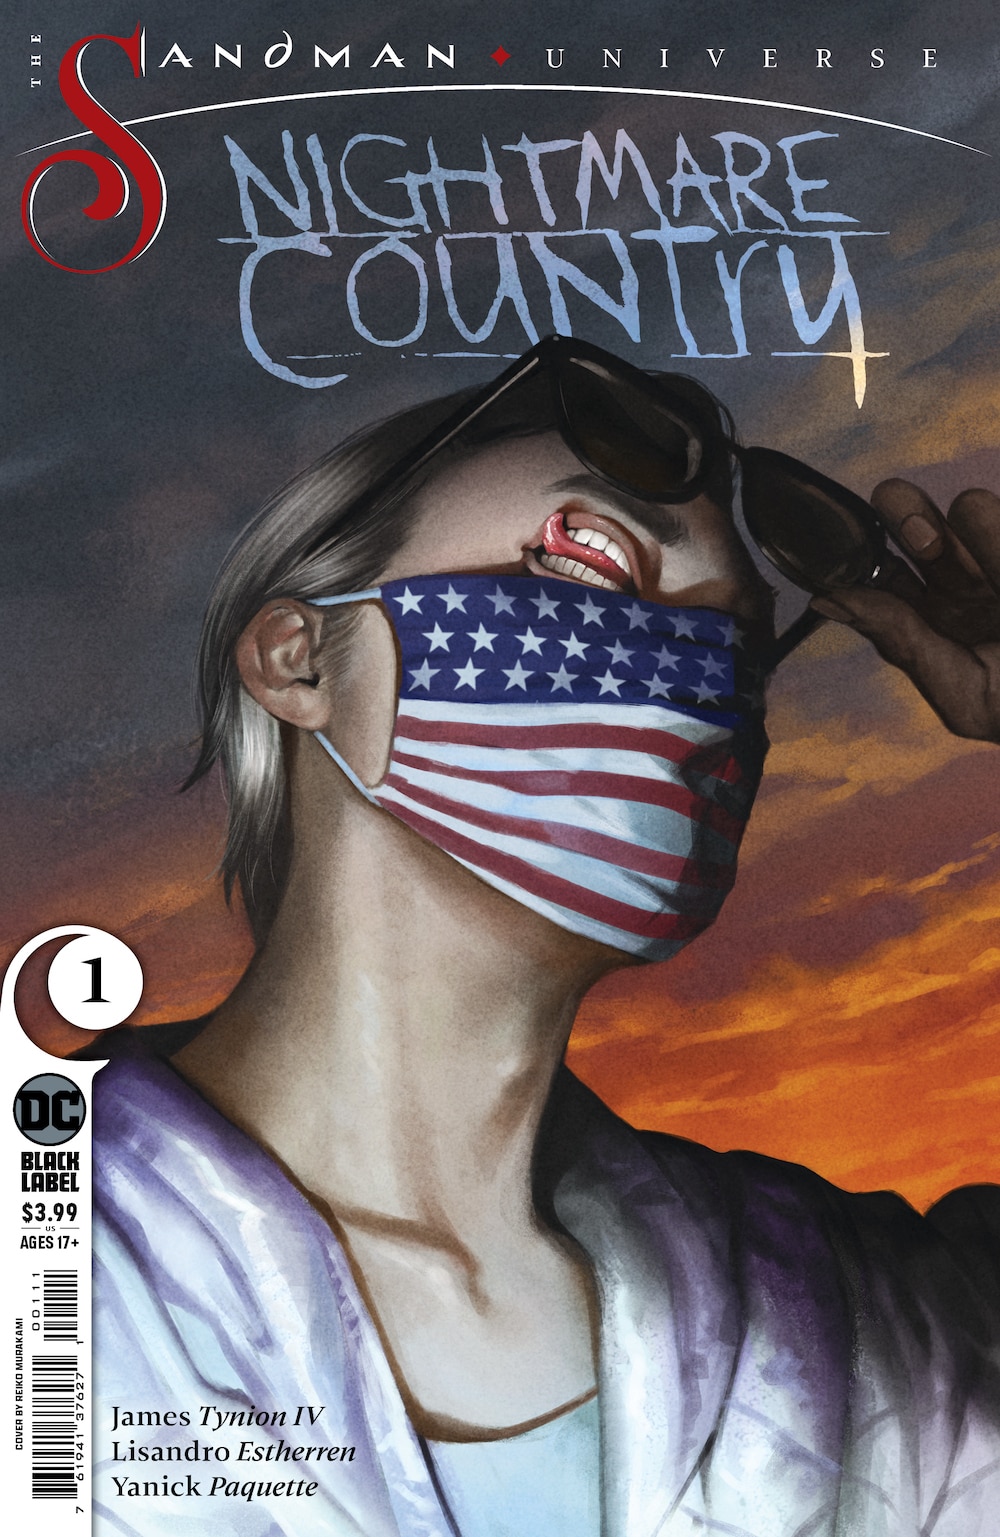 The Cover of Sandman Universe: Nightmare County #1